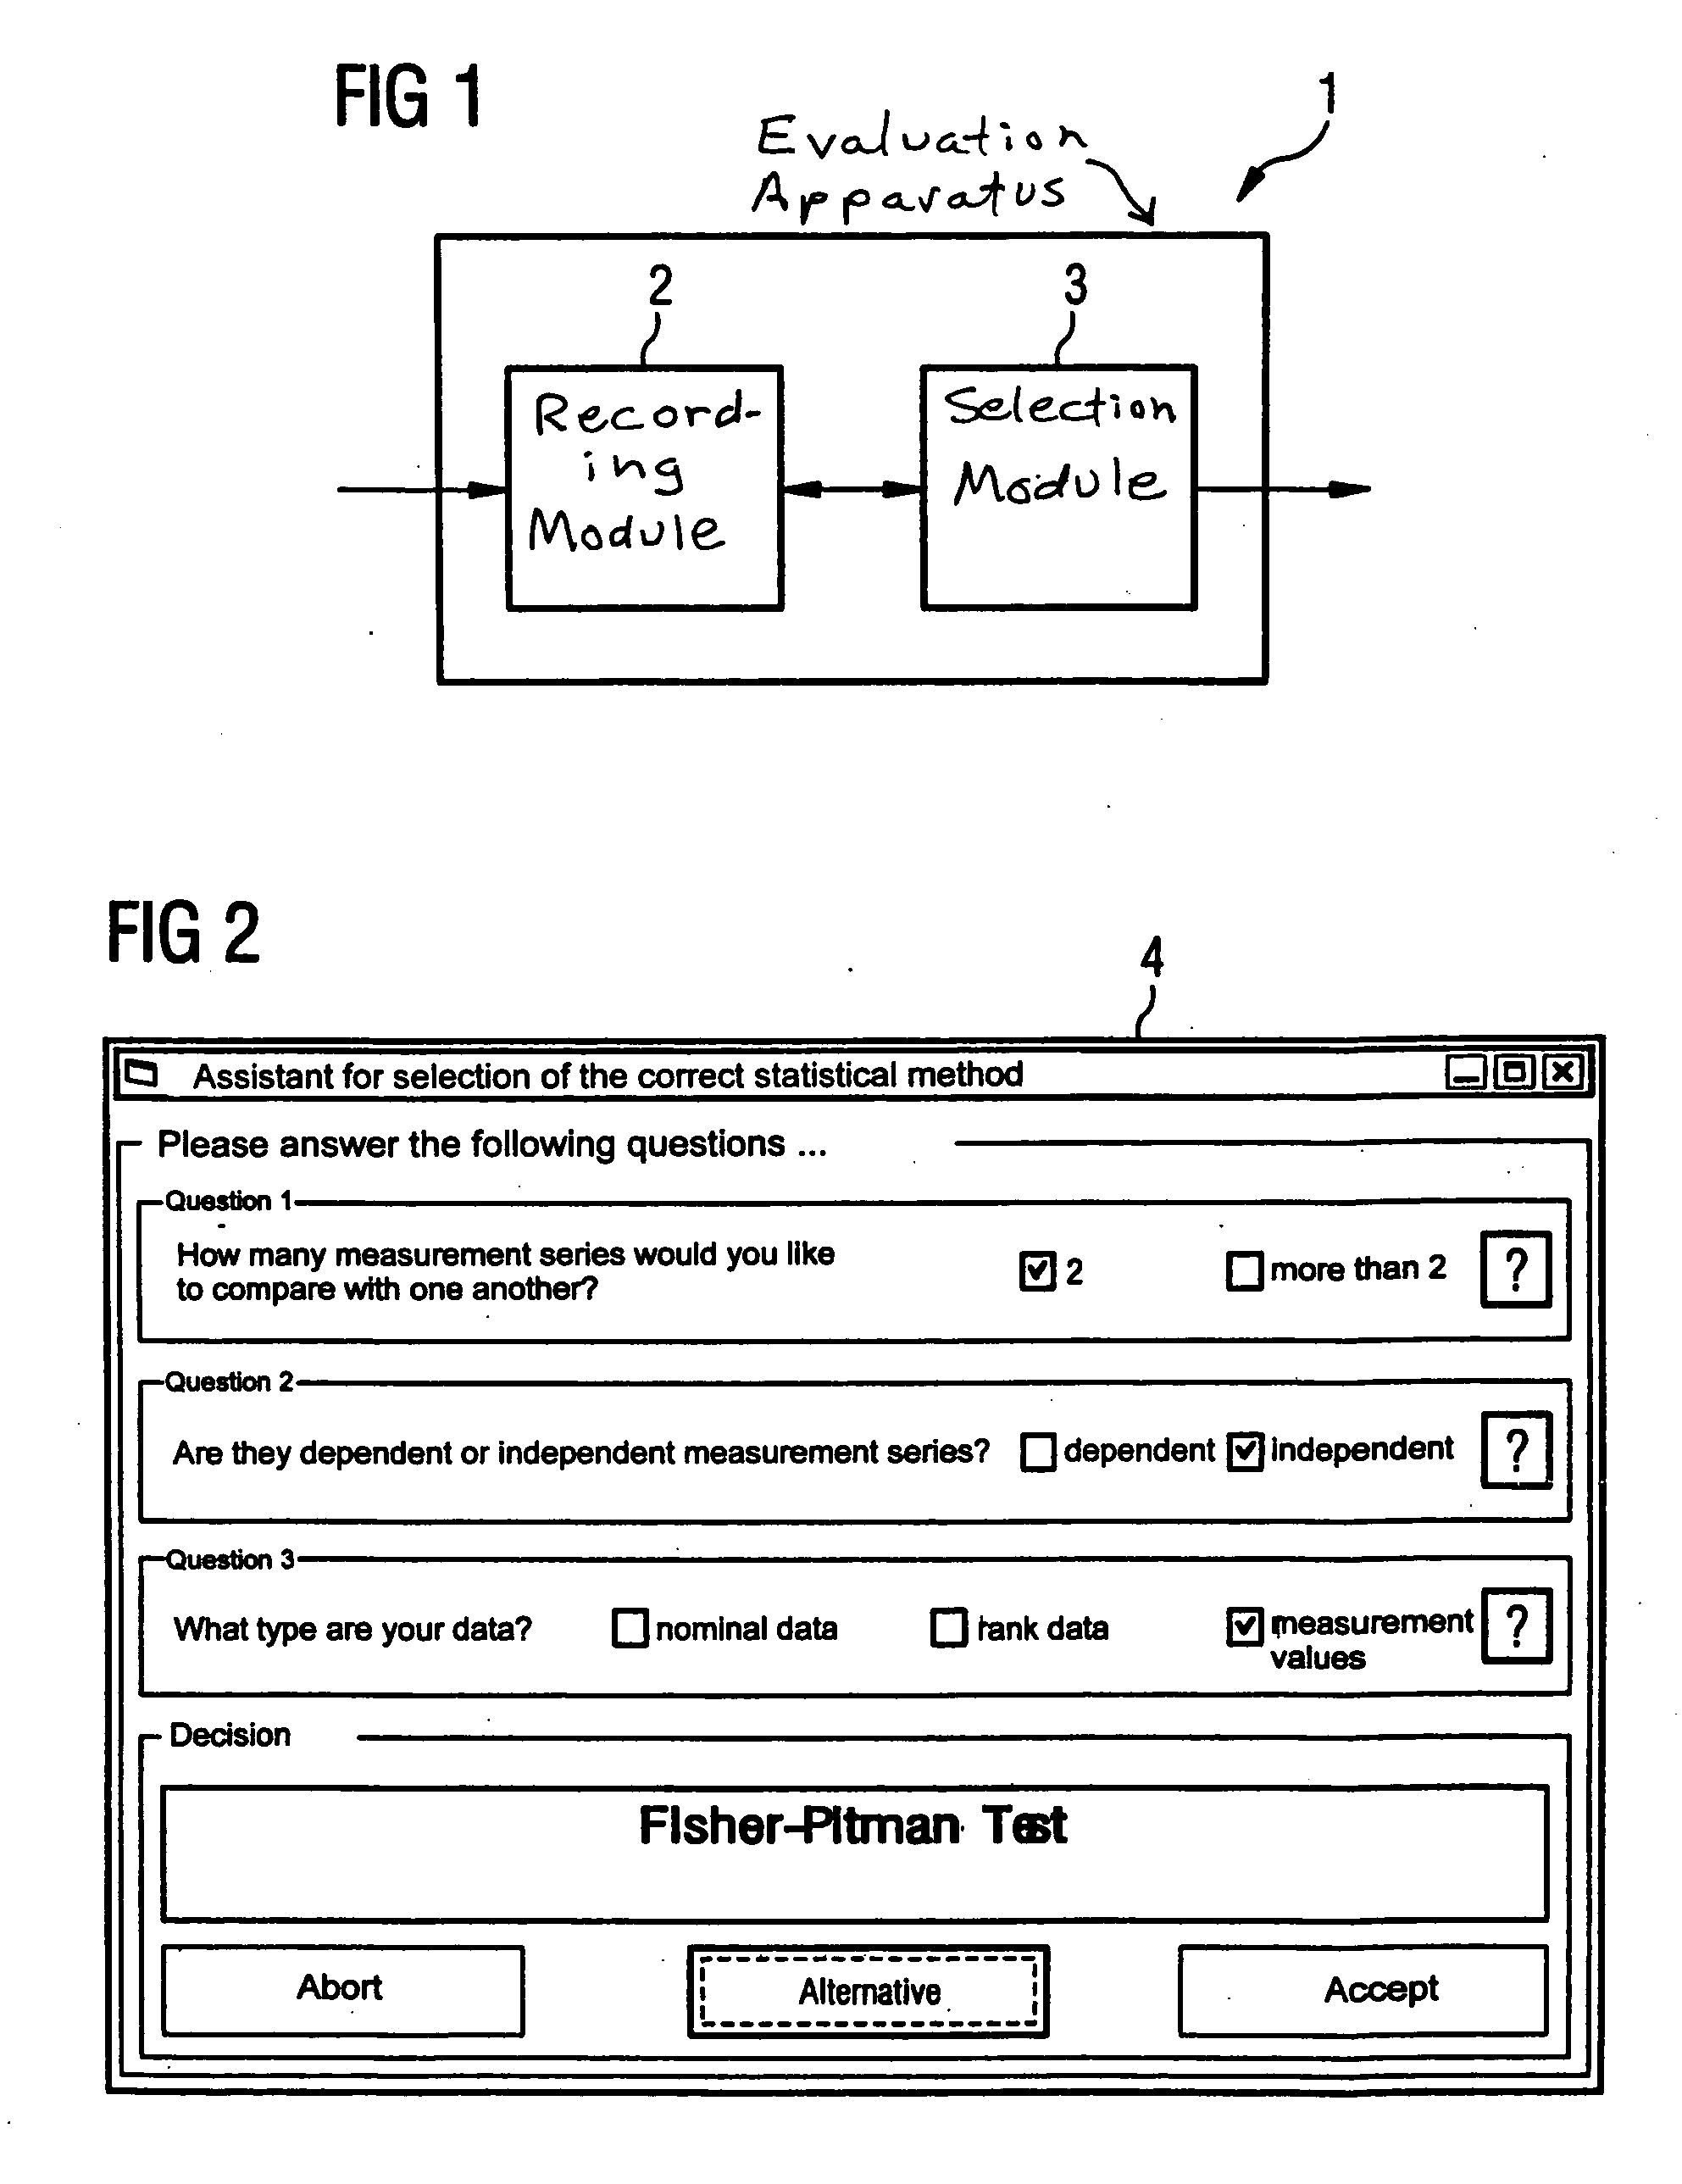 Method, apparatus, system and computer program product for selection of a static evaluation method for an empirical examination of measurement series